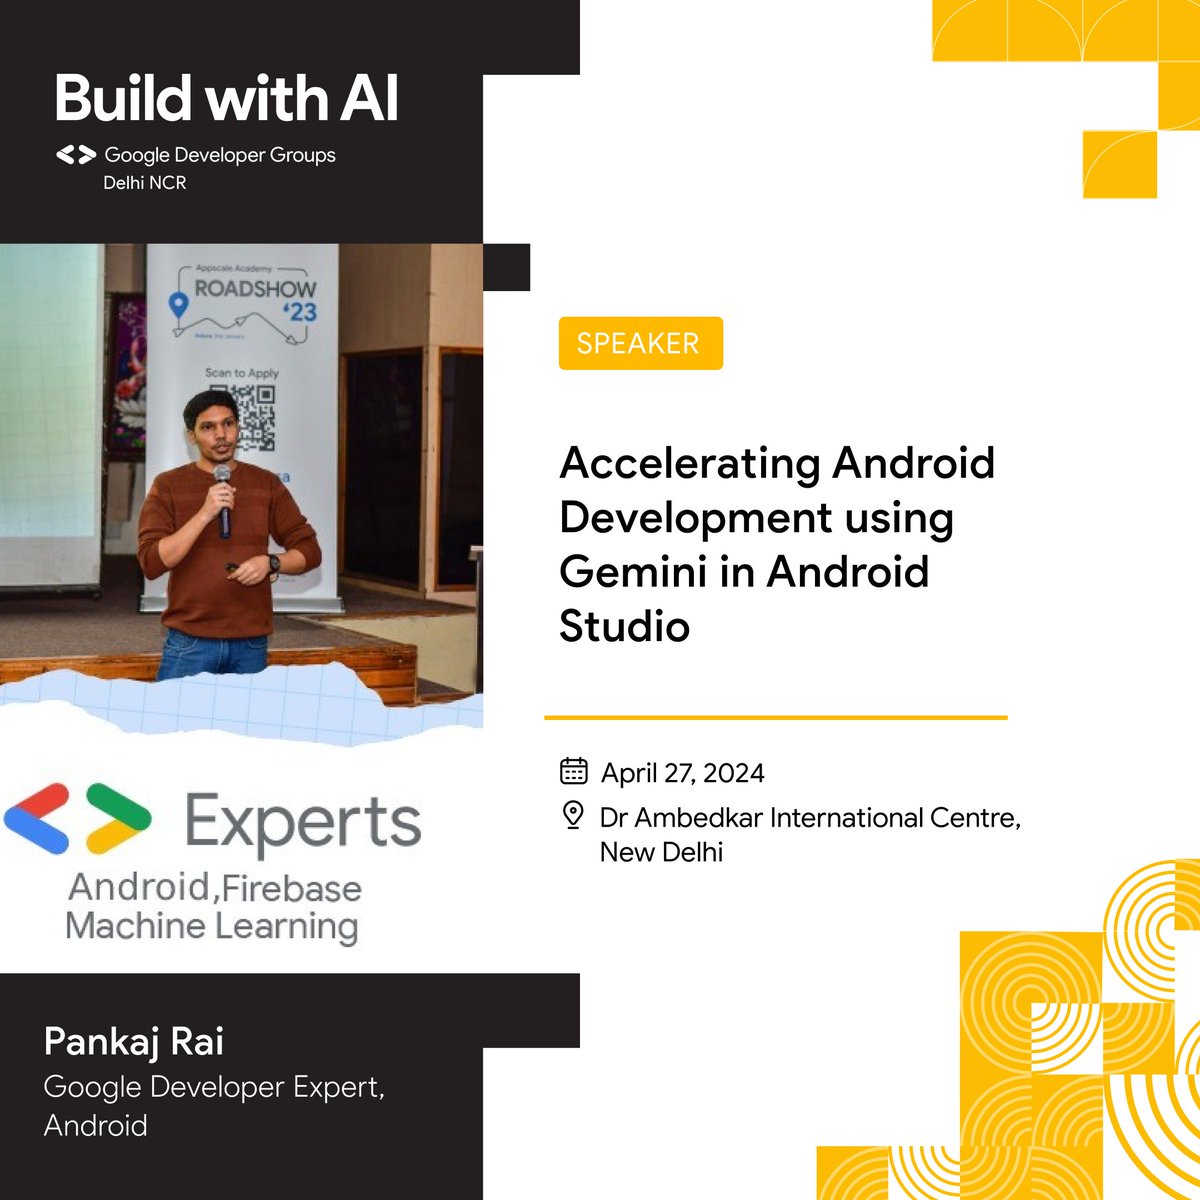 Android warriors! 💥 Go into ludicrous speed with Pankaj Rai as he reveals how to supercharge your app dev using Gemini in Android Studio. Your AI co-pilot to cleaner, smarter code awaits!